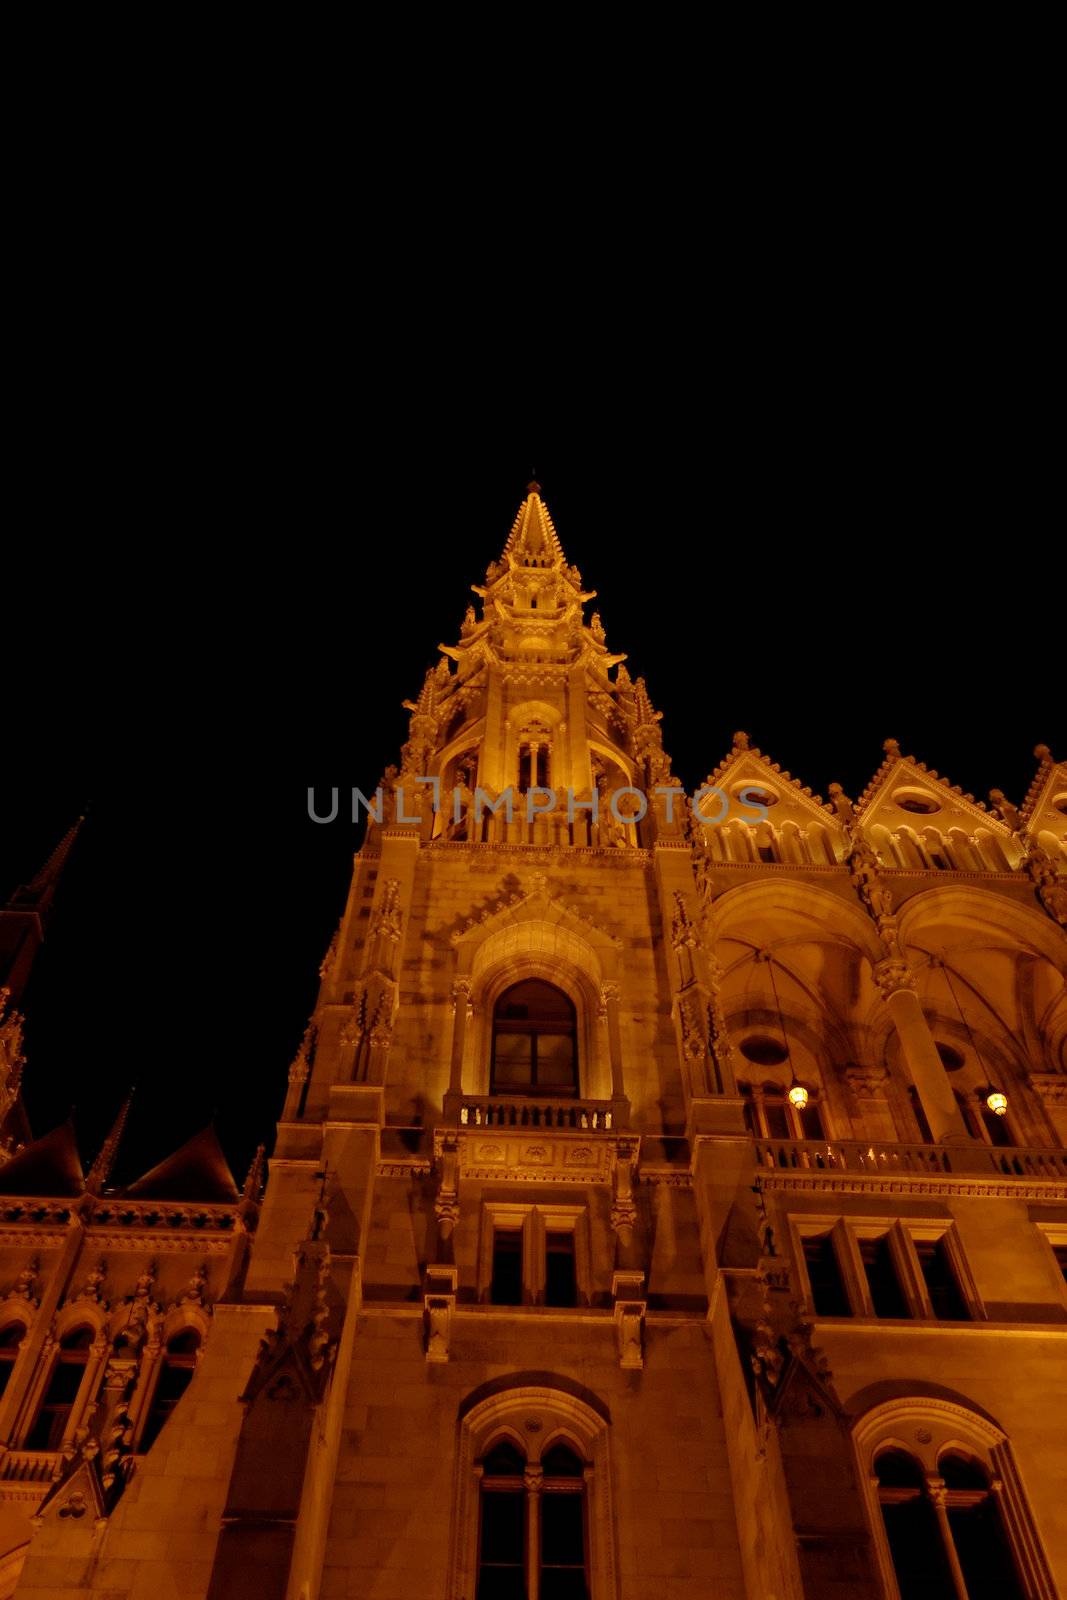 Budapest Parliament building in Hungary at twilight detail